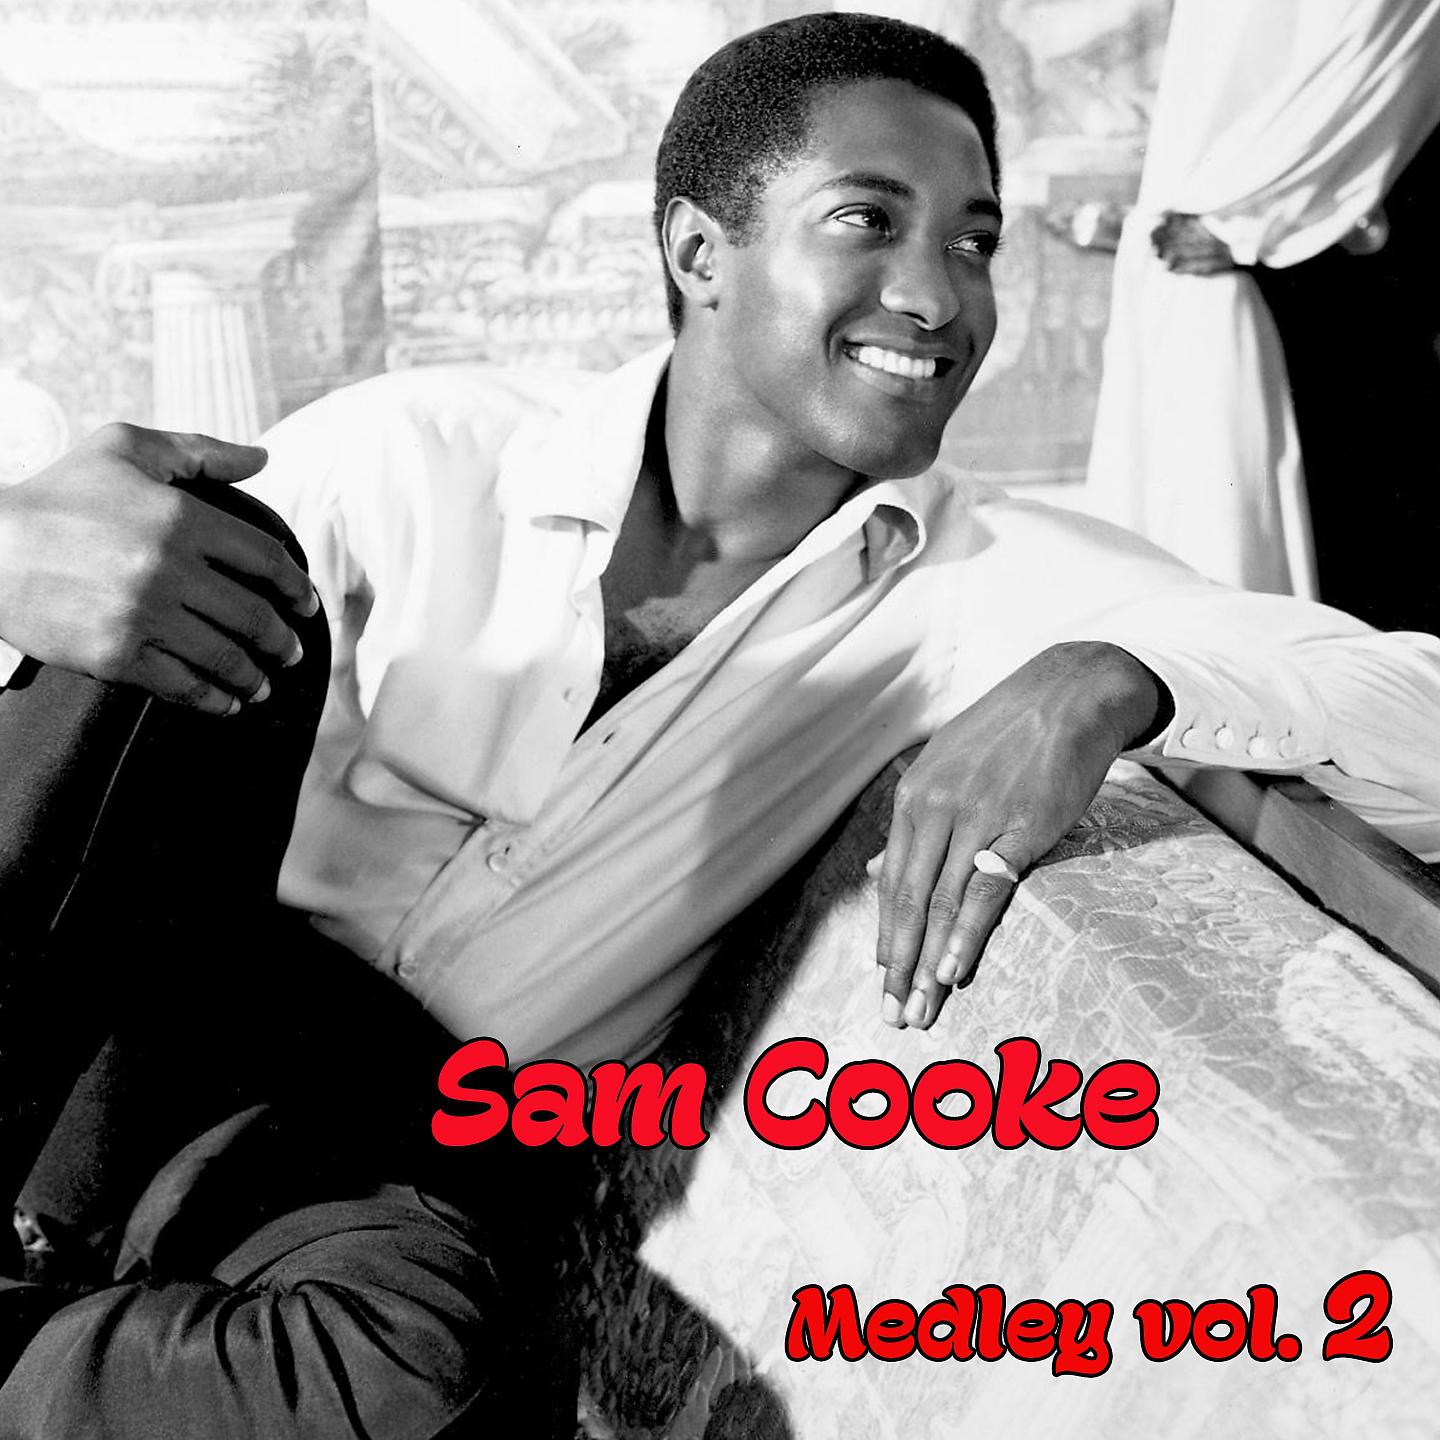 Постер альбома Sam Cooke Medley 2: Let's Go Steady Again / Happy in Love / Ain't Nobody's Bizness (If I Do) / I Need You Now / Blue Moon / Only Sixteen / You Send Me / Everybody Loves to Cha Cha Cha / Win Your Love for Me / Steal Away / So Glamorous / Mary, Mary Lou / T